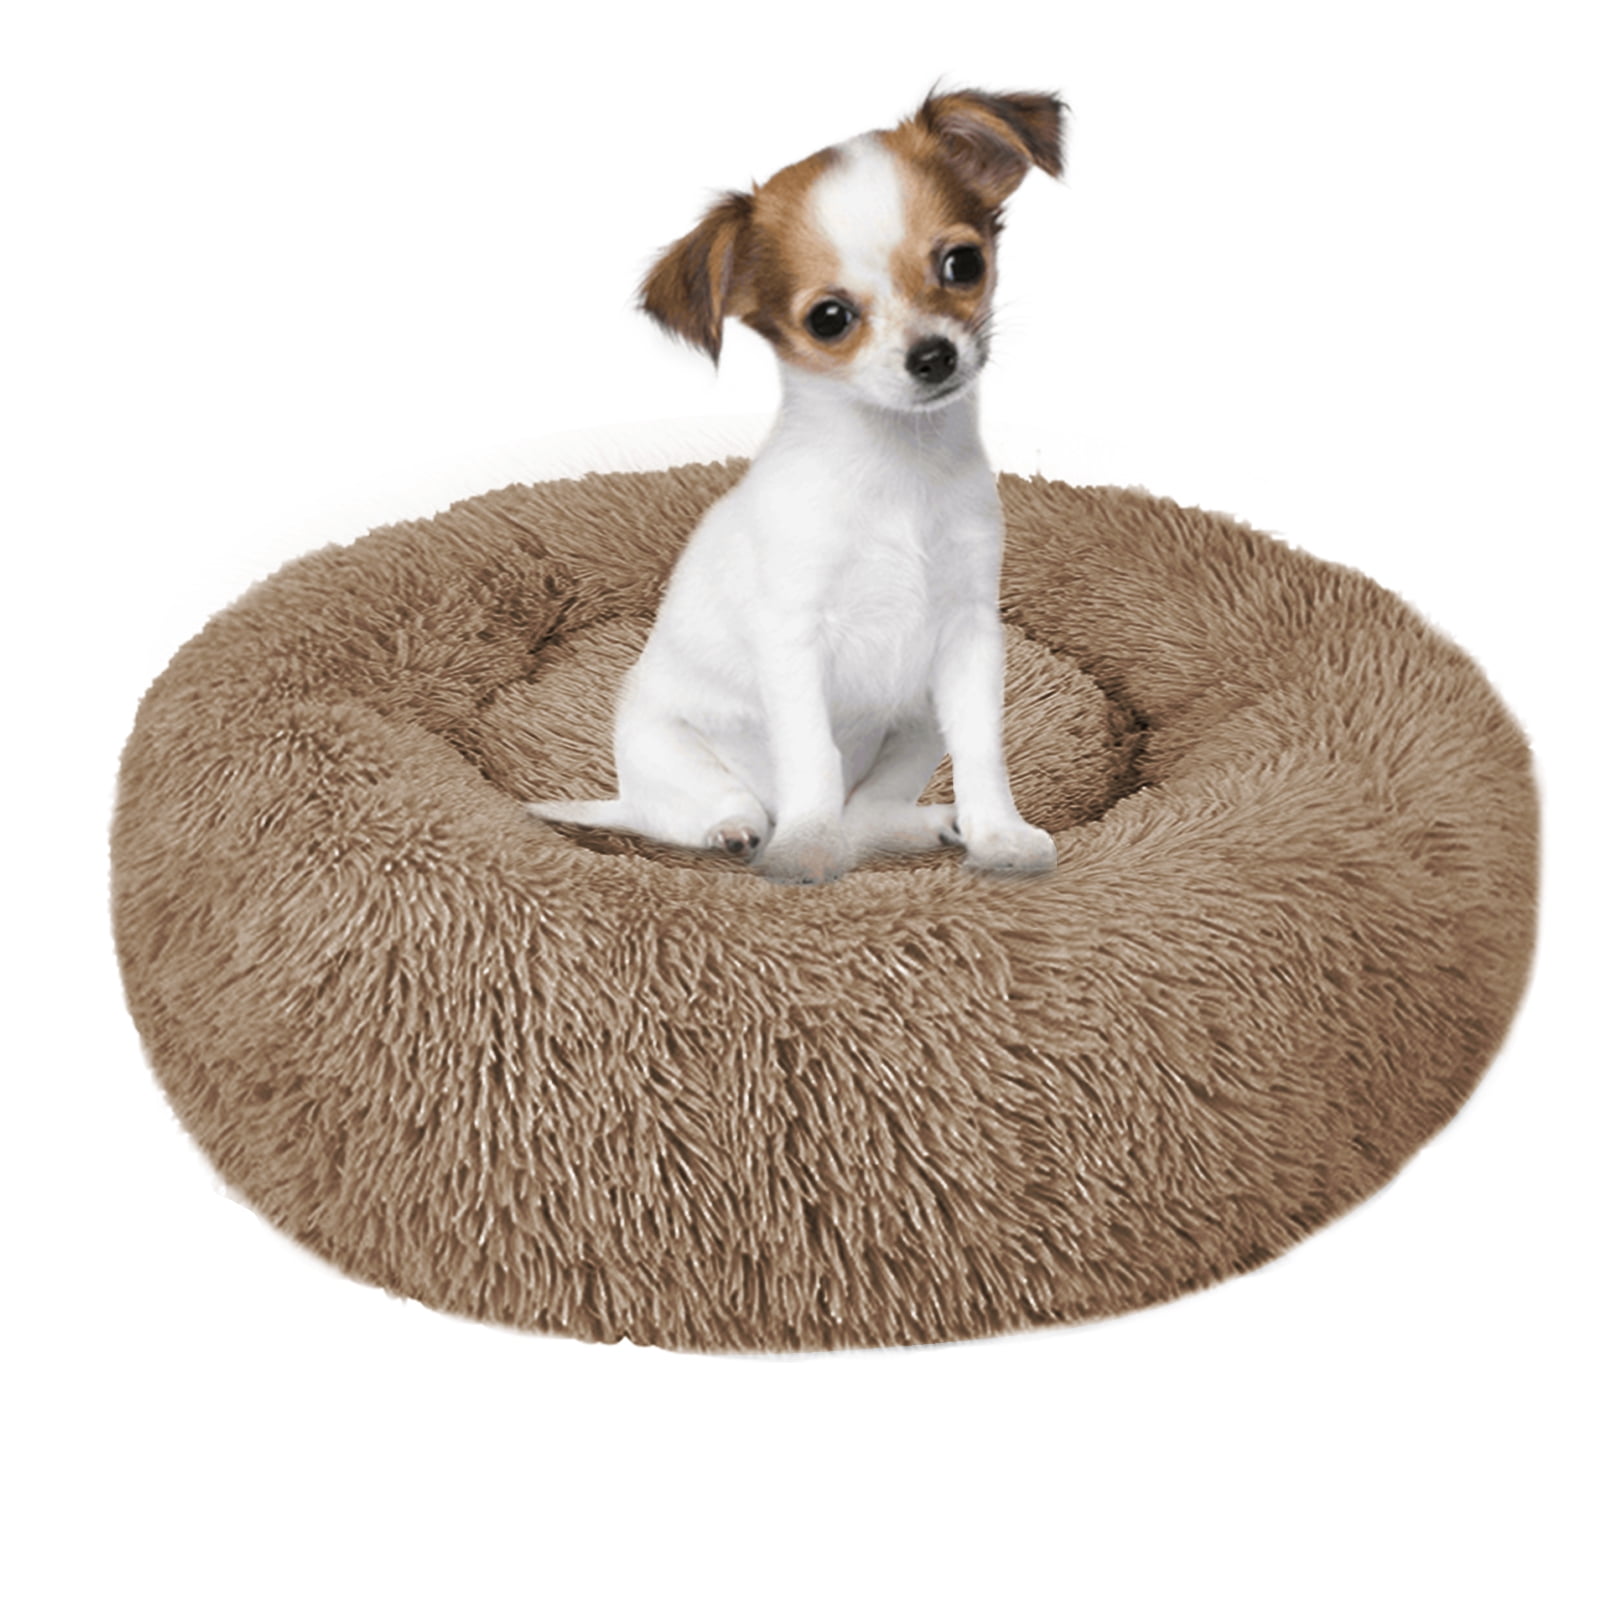 Microdry – Soft, Cozy & Plush Dog Pet Bed Scratch, Tear and Bite Resistant, Machine Washable, Self Warming - Small to Medium Size Dogs - 20x26x8